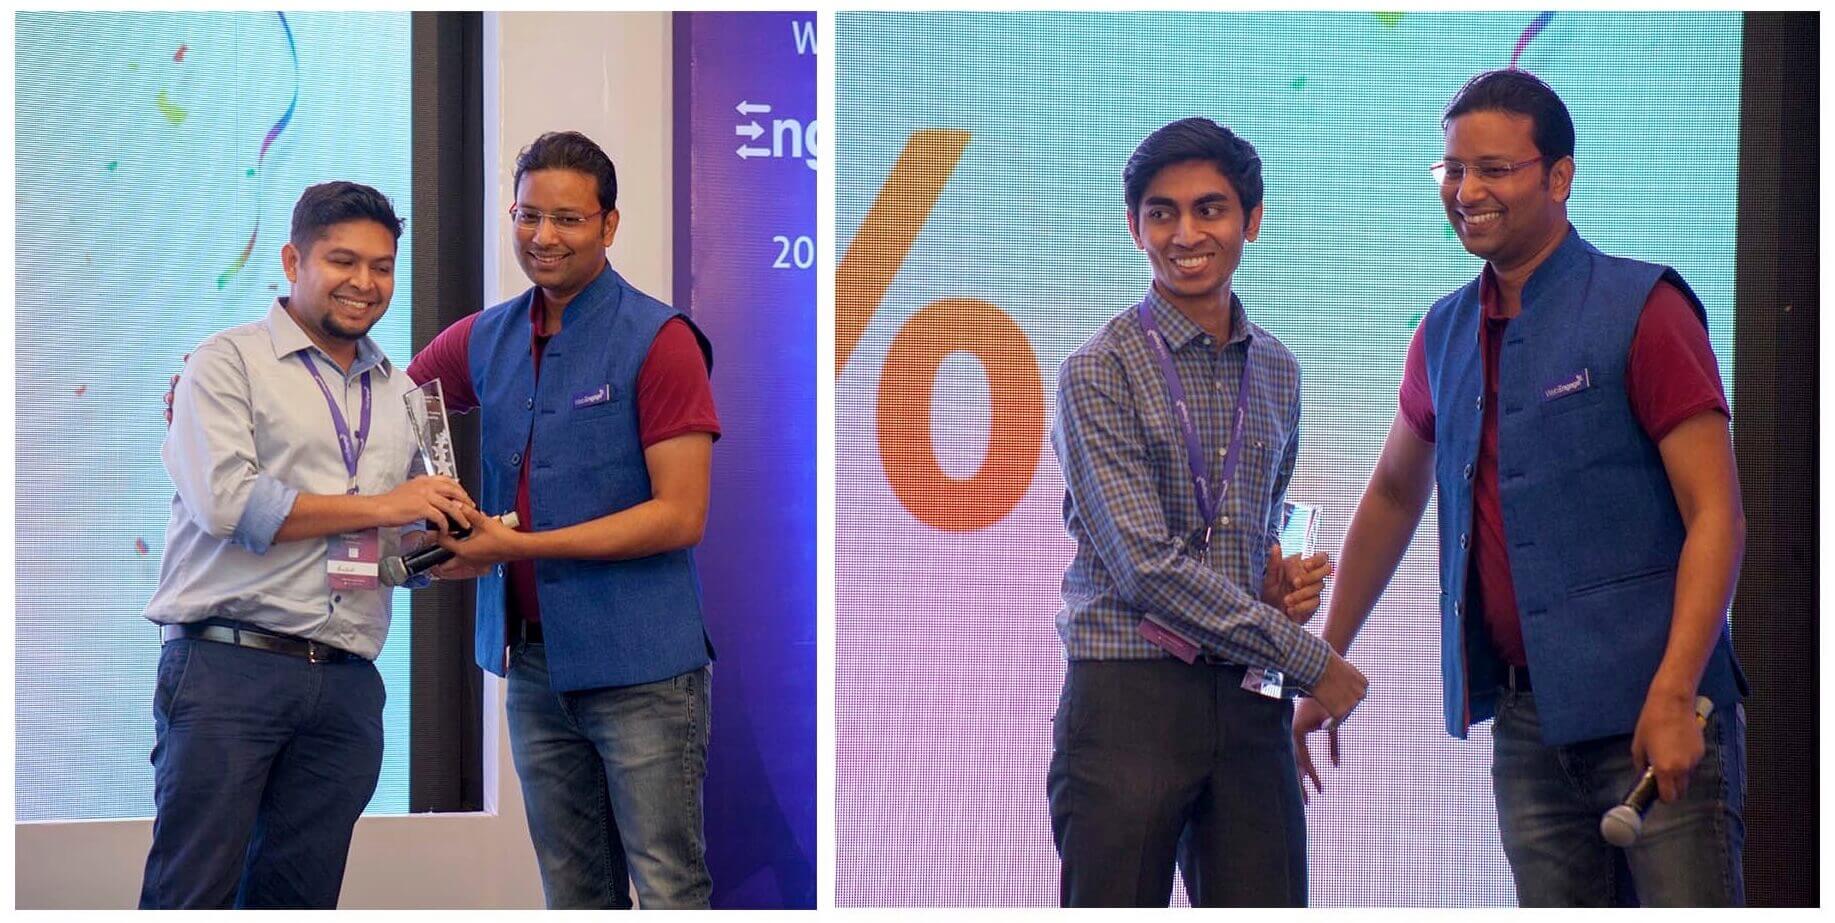 Aniket and Kushal receiving their respective EngageMint retention awards